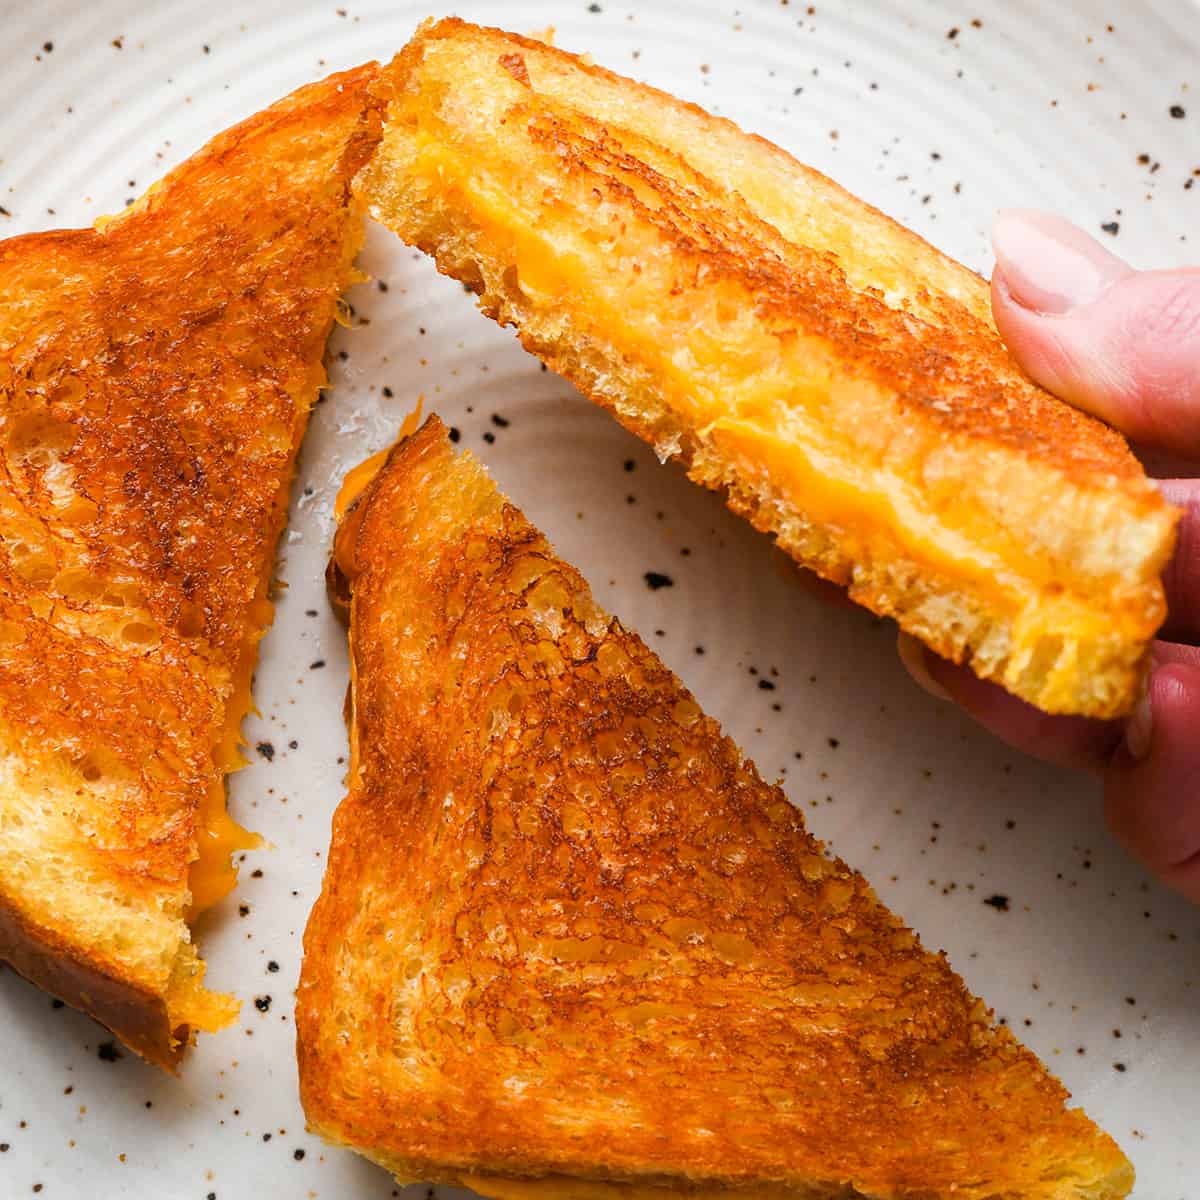 three halves of a grilled cheese sandwich on a plate